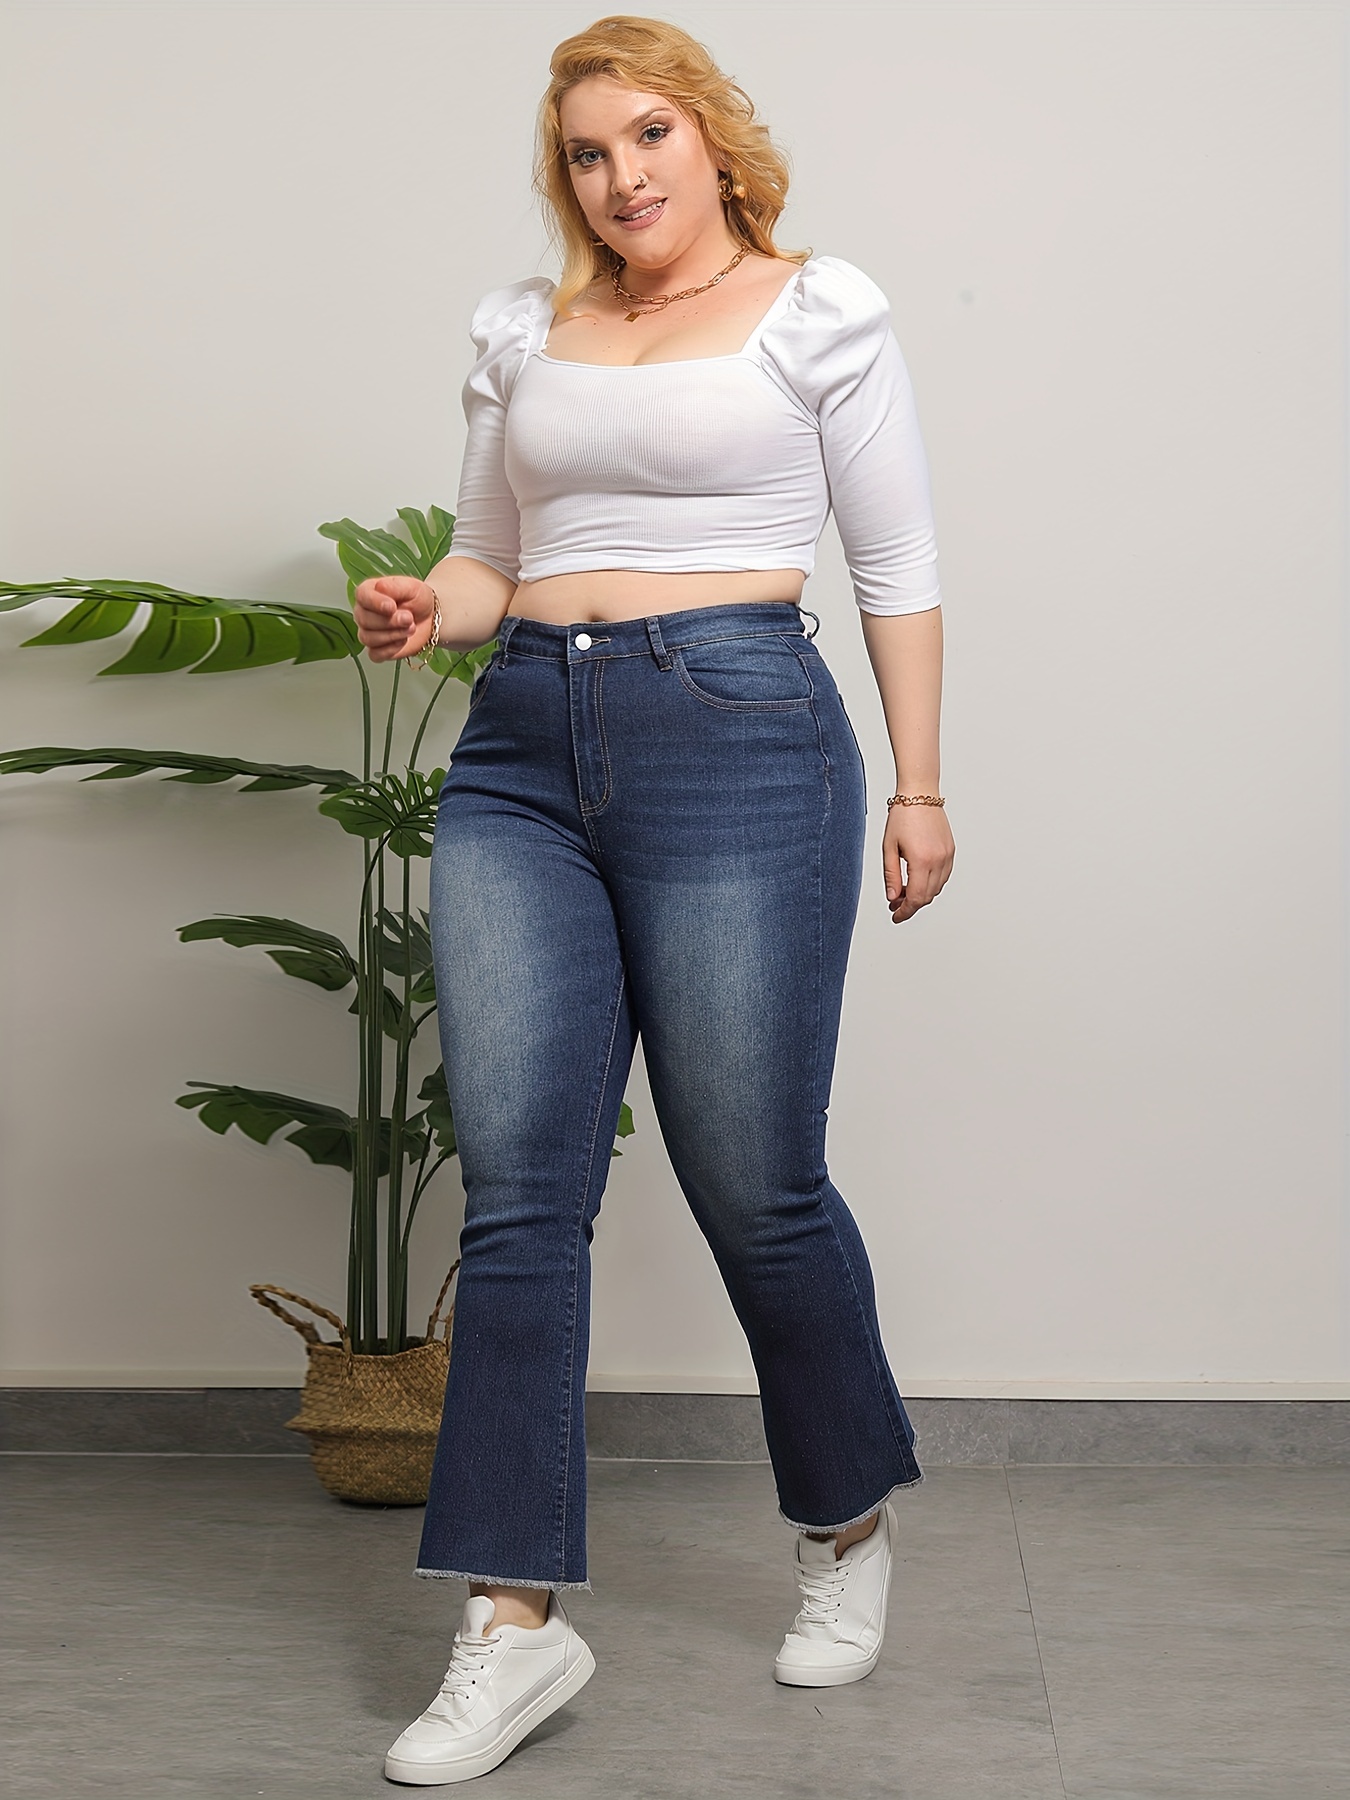 Plus Size Casual Jeans Women's Plus Washed Button Fly Medium